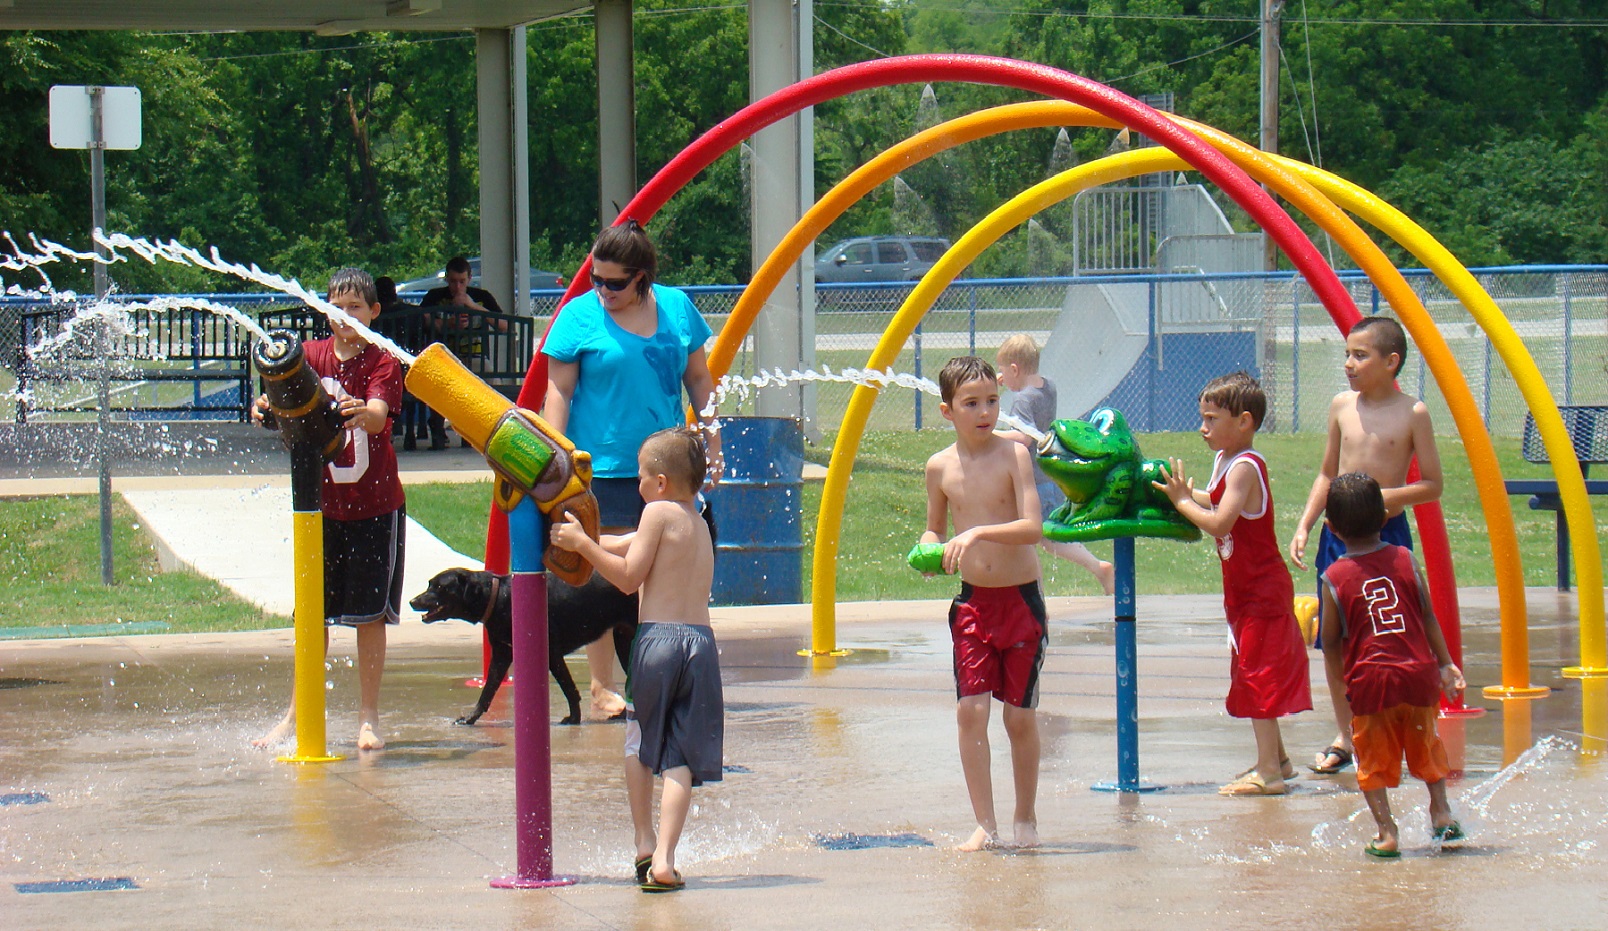   building better communities   Commercial Recreation Design &amp; Installation   LEARN MORE  